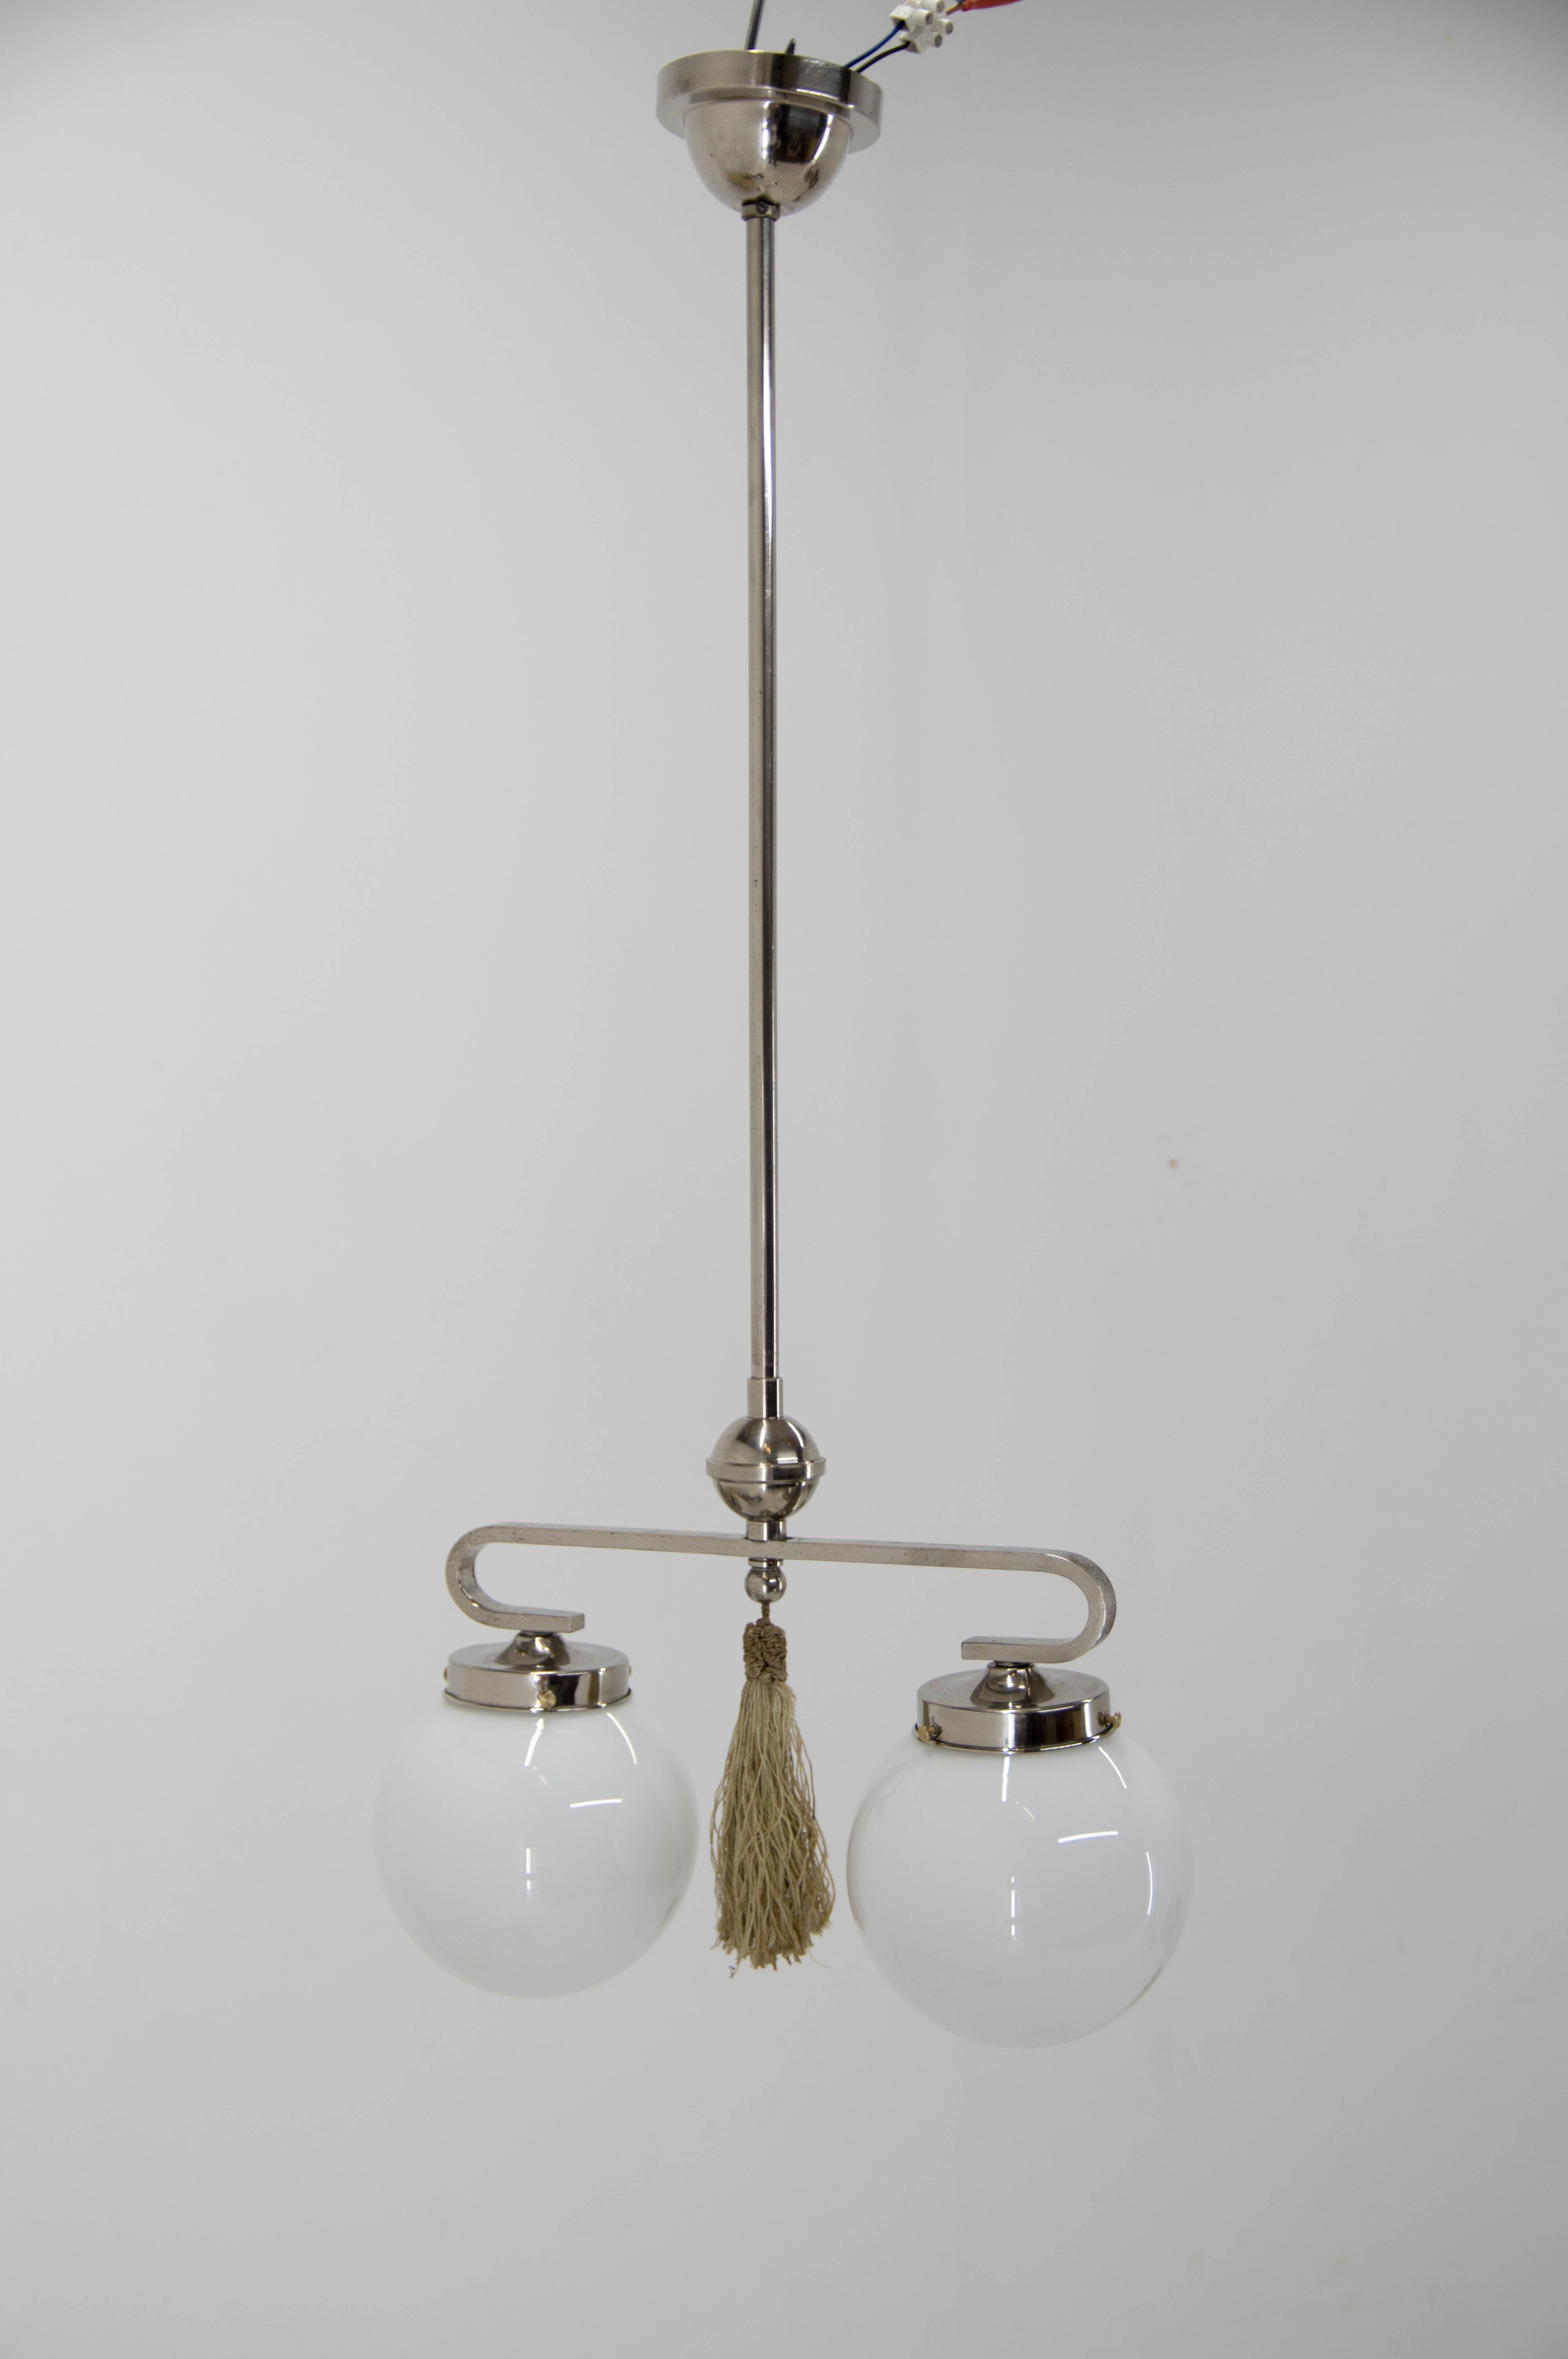 New opaline glass shades
Chrome with minor age patina - polished
Rewired: 2x40W, E25-E27 bulb
US wiring compatible.